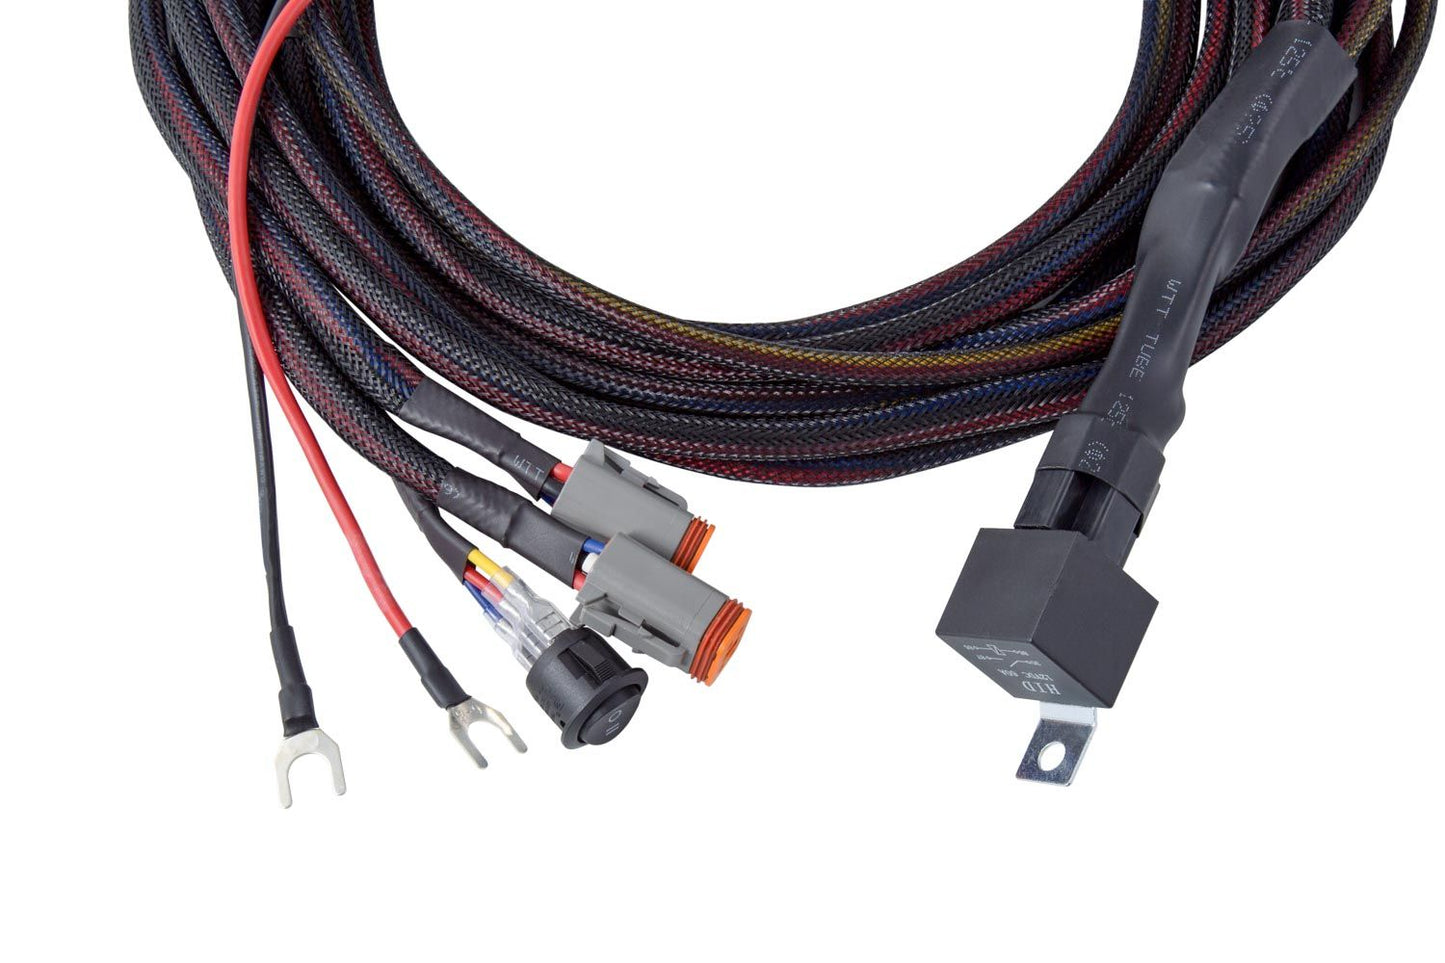 Diode Dynamics - Heavy Duty Dual Output 4-pin Wiring Harness (Stage Series w/ Backlight)